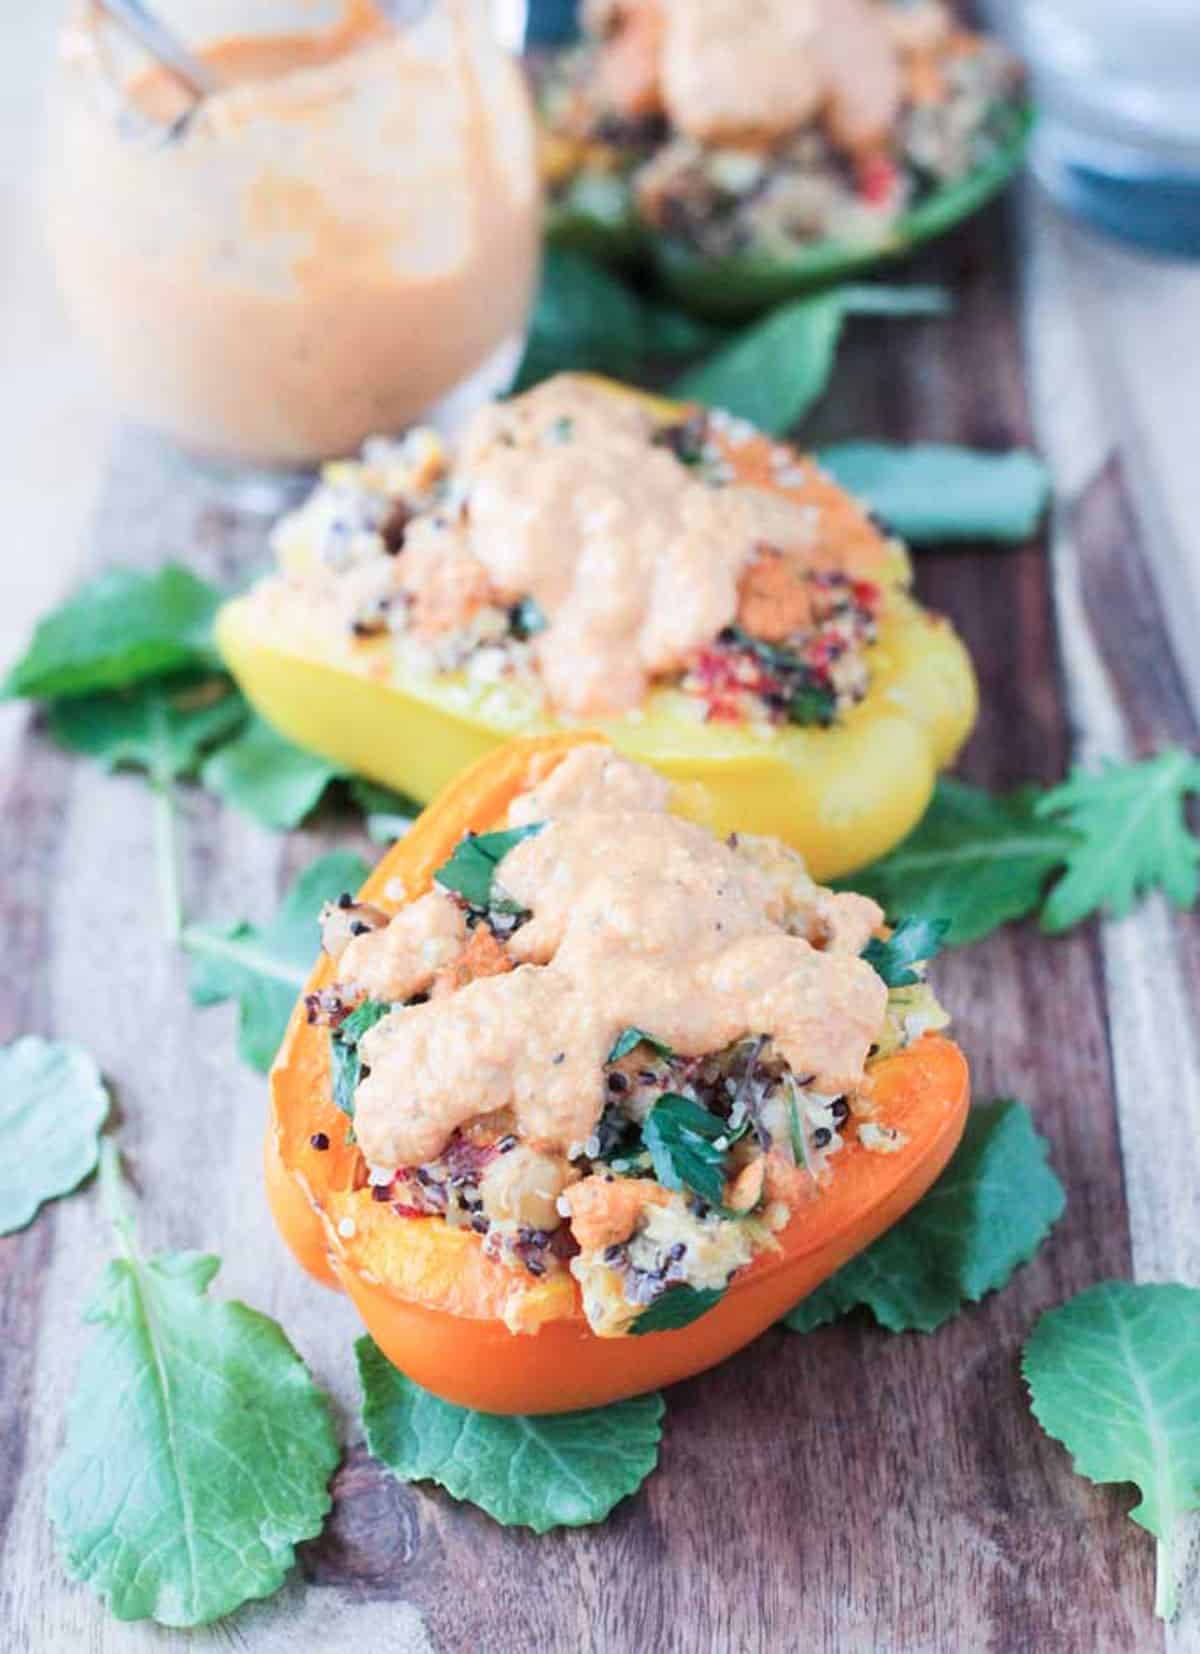 Two quinoa stuffed peppers with red pepper sauce drizzled on top.